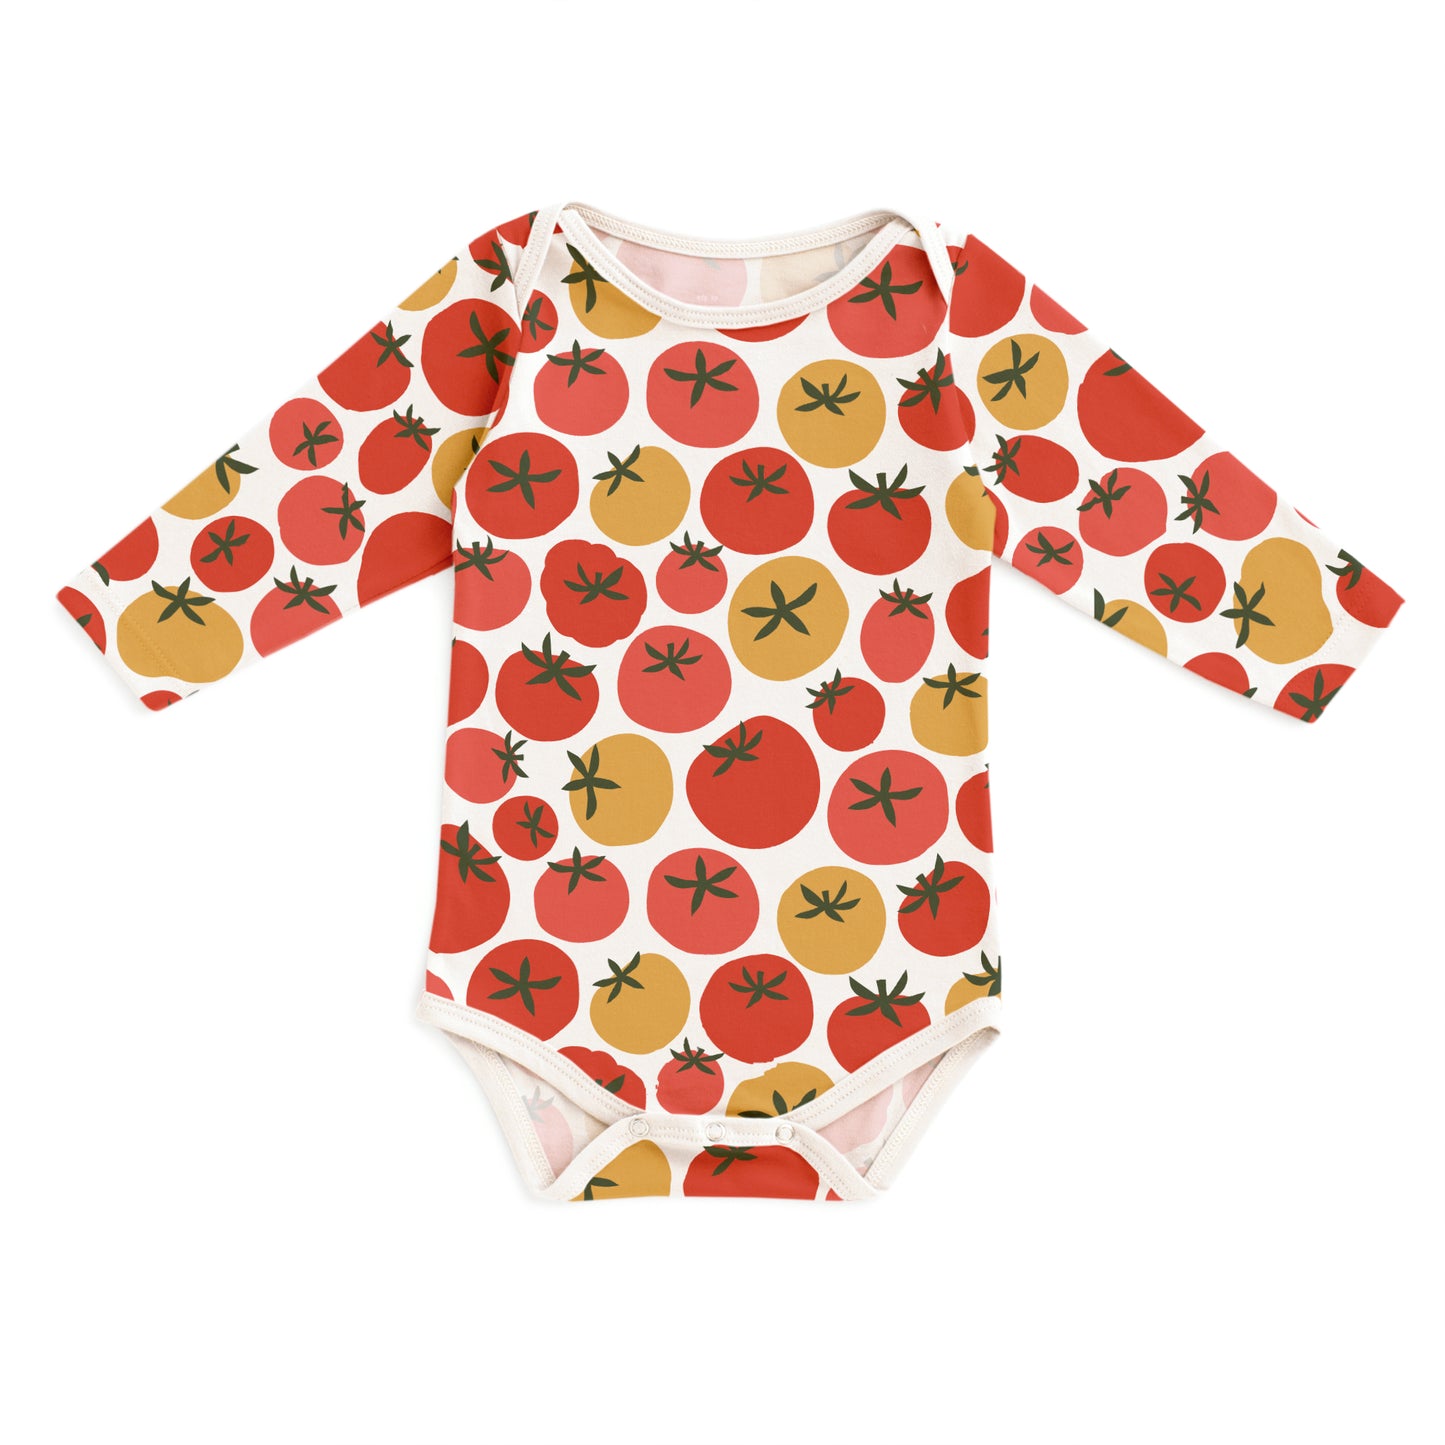 Long-Sleeve Snapsuit - Tomatoes Red & Yellow